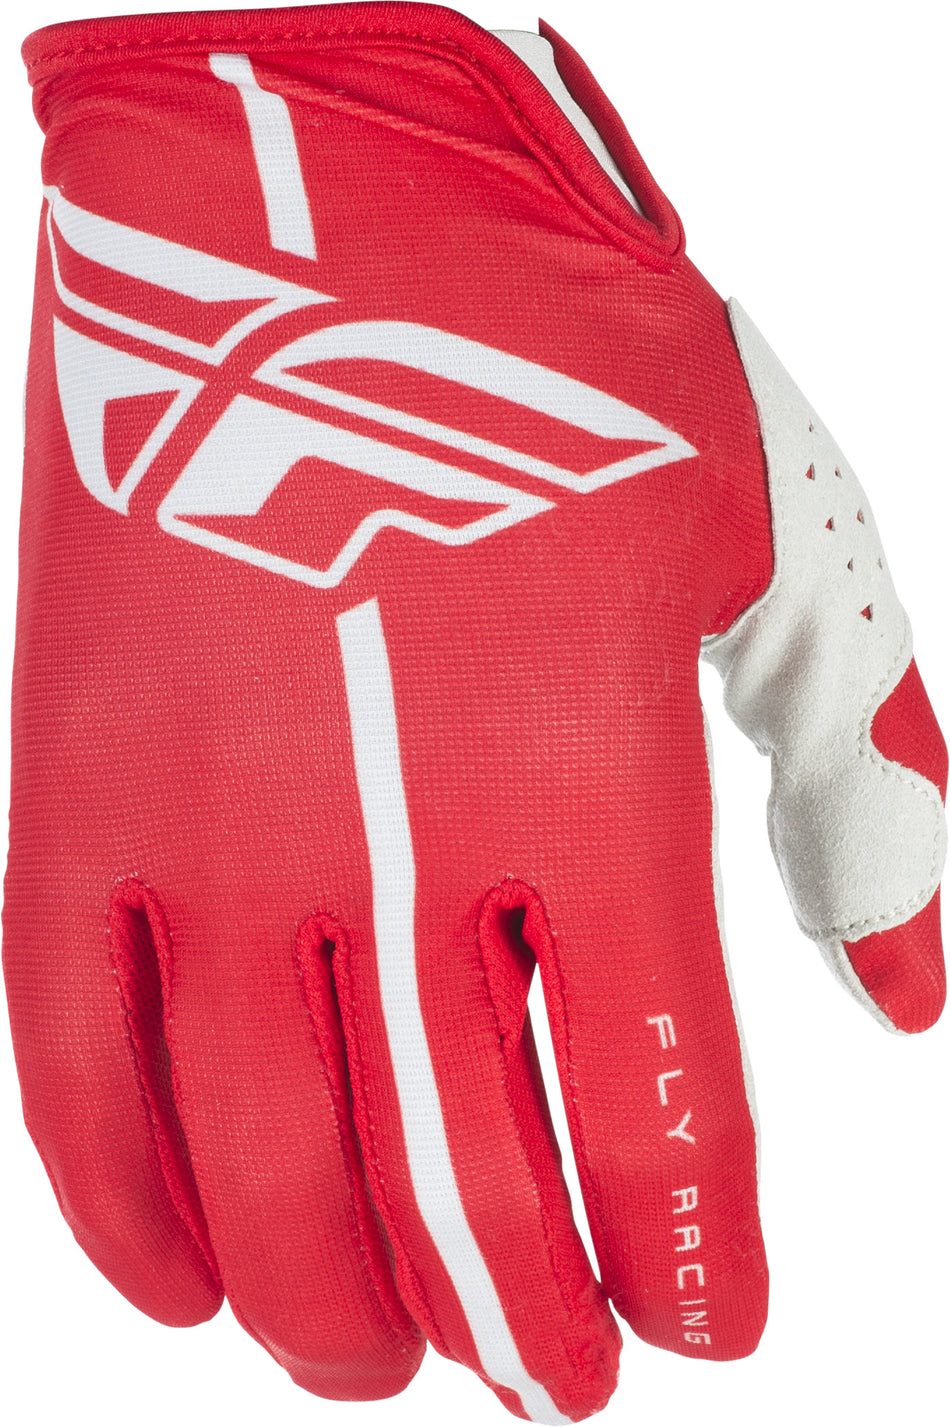 FLY RACING Lite Gloves Red/Grey Sz 10 371-01210